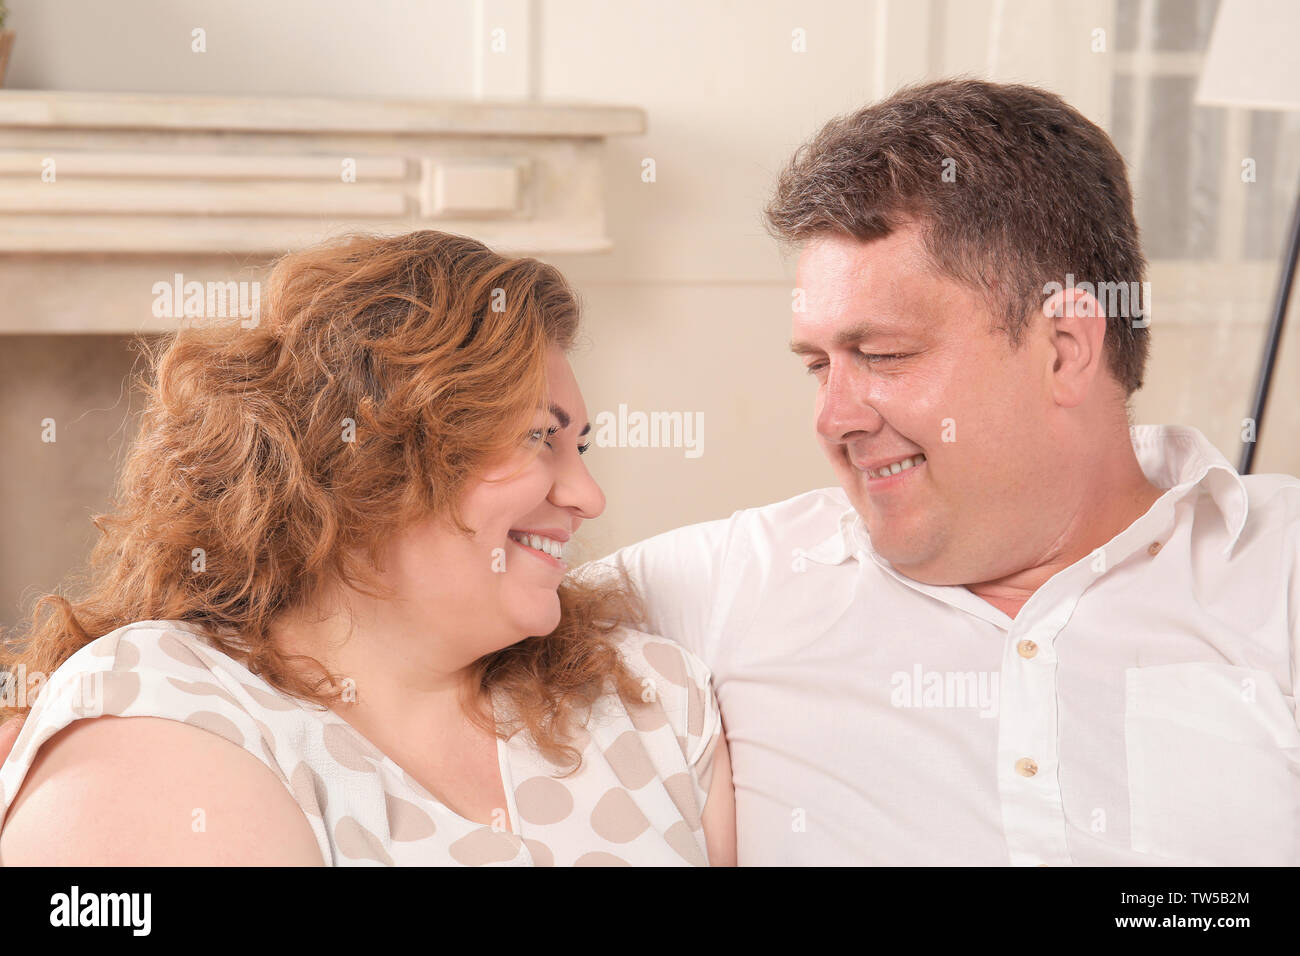 Overweight couple at home Stock Photo